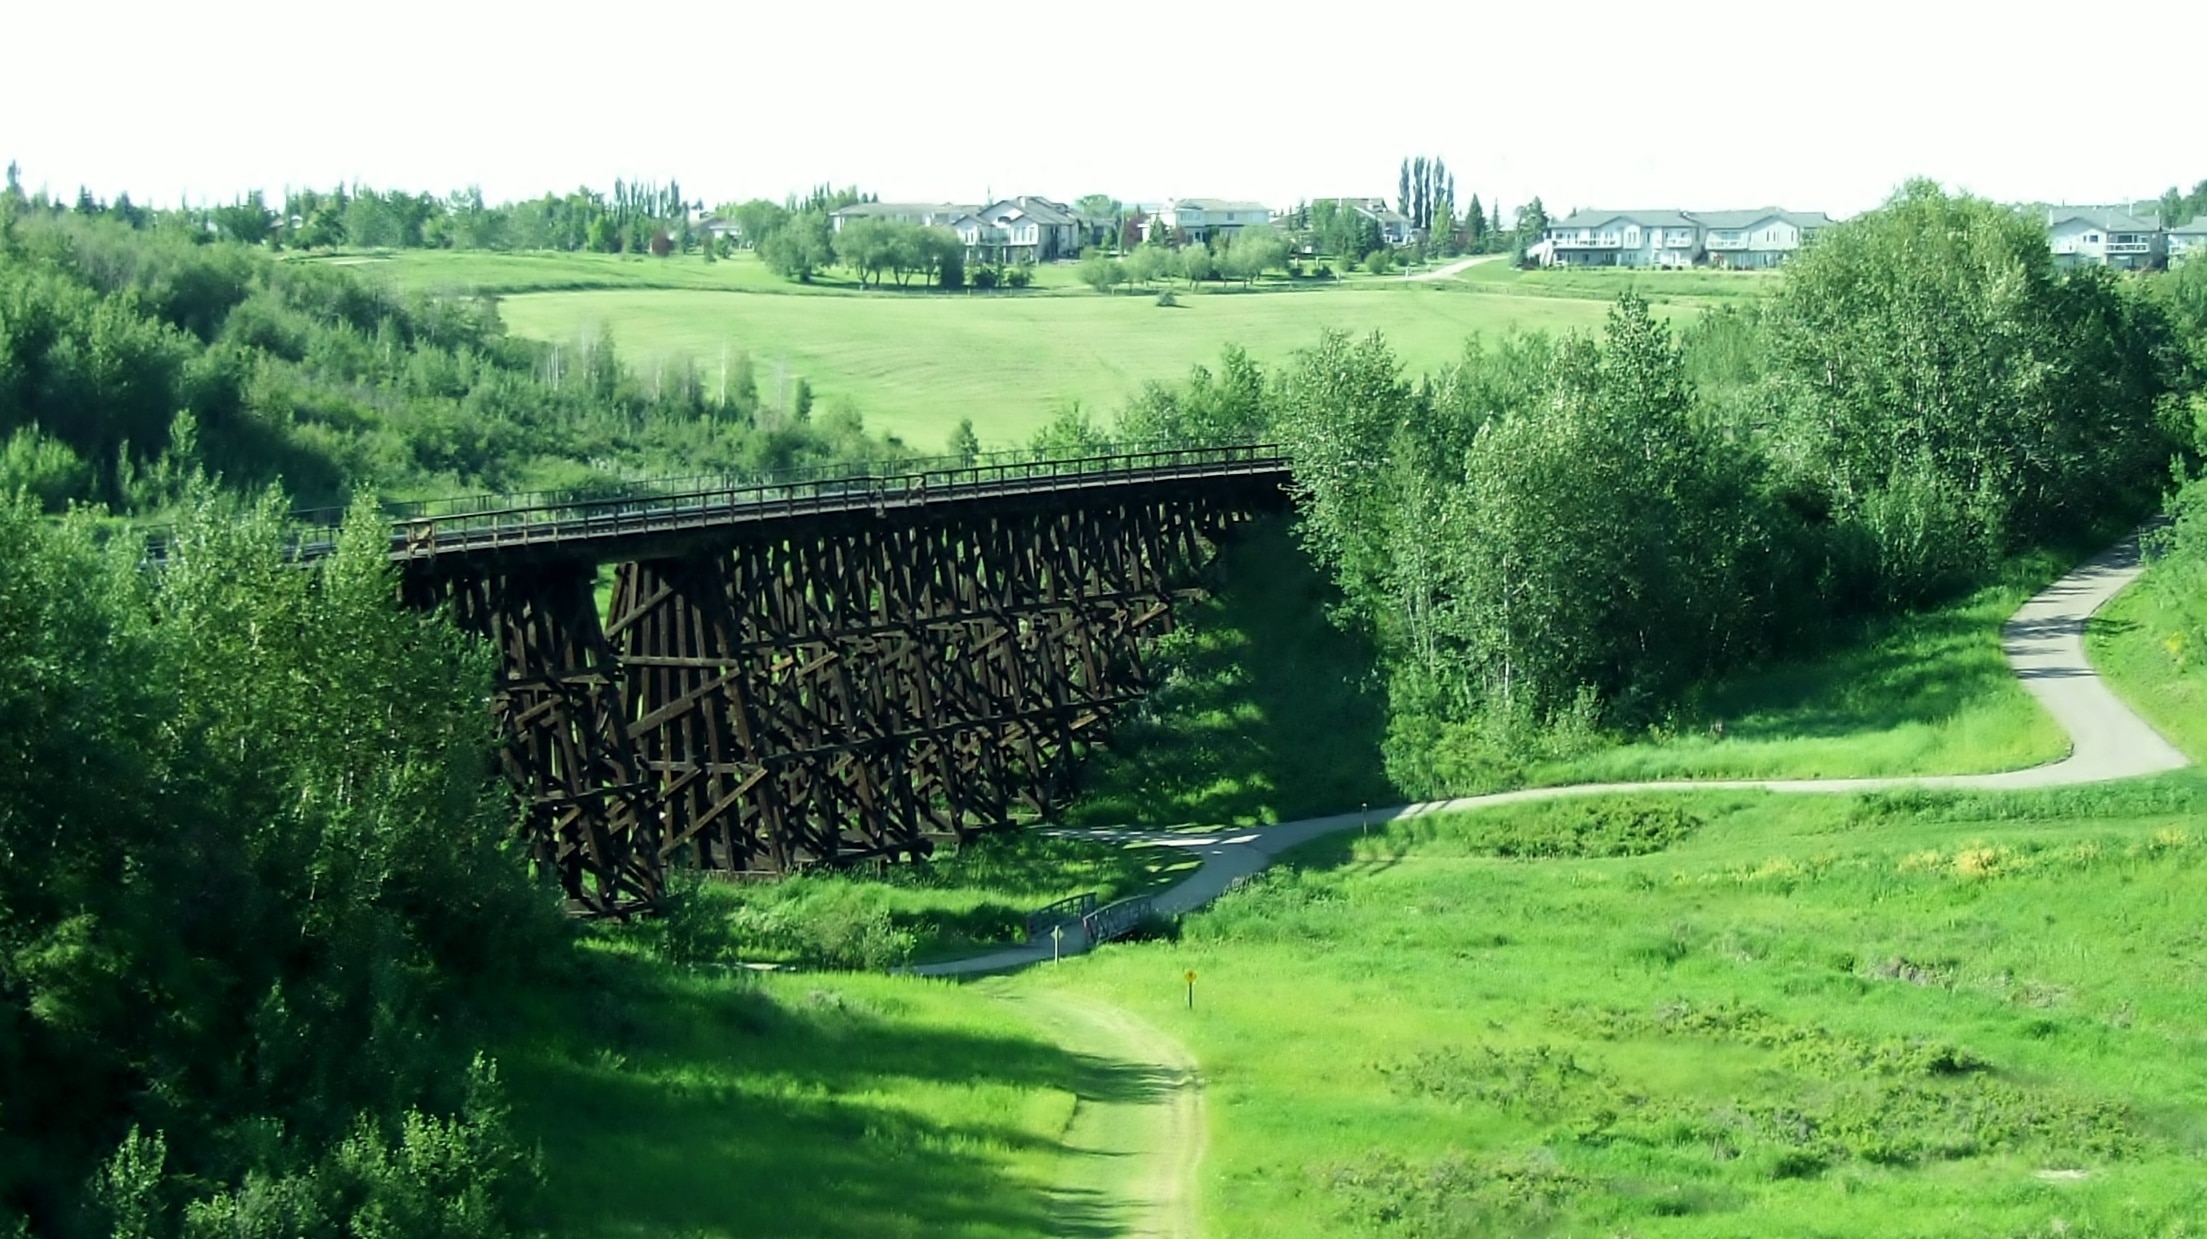 A wooden railroad trestle with a trail on the bround far below.